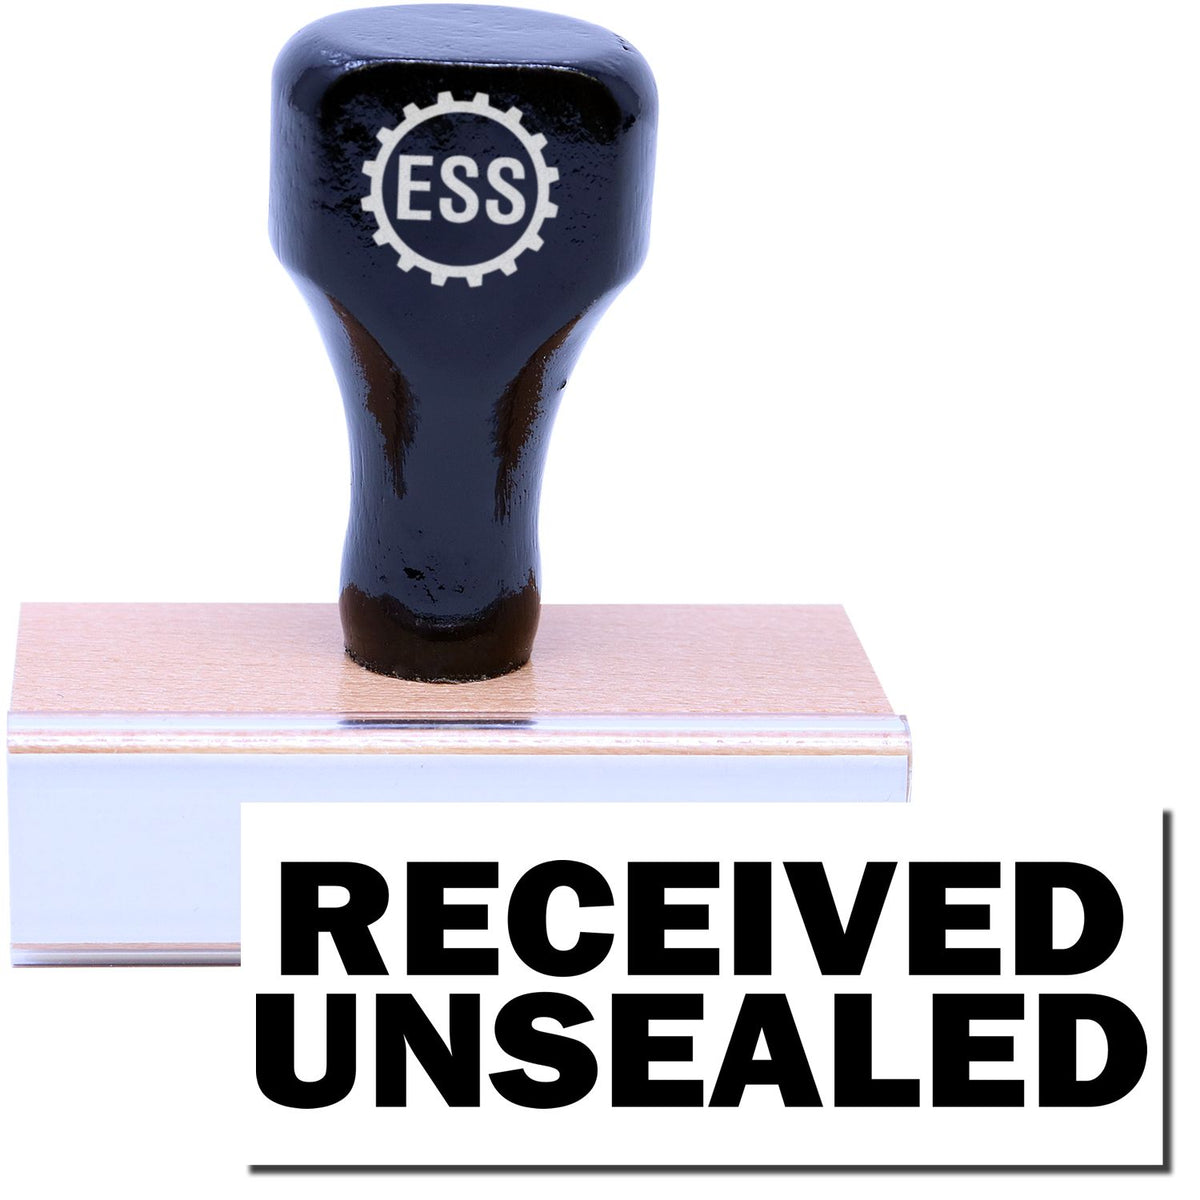 A stock office rubber stamp with a stamped image showing how the text &quot;RECEIVED UNSEALED&quot; is displayed after stamping.